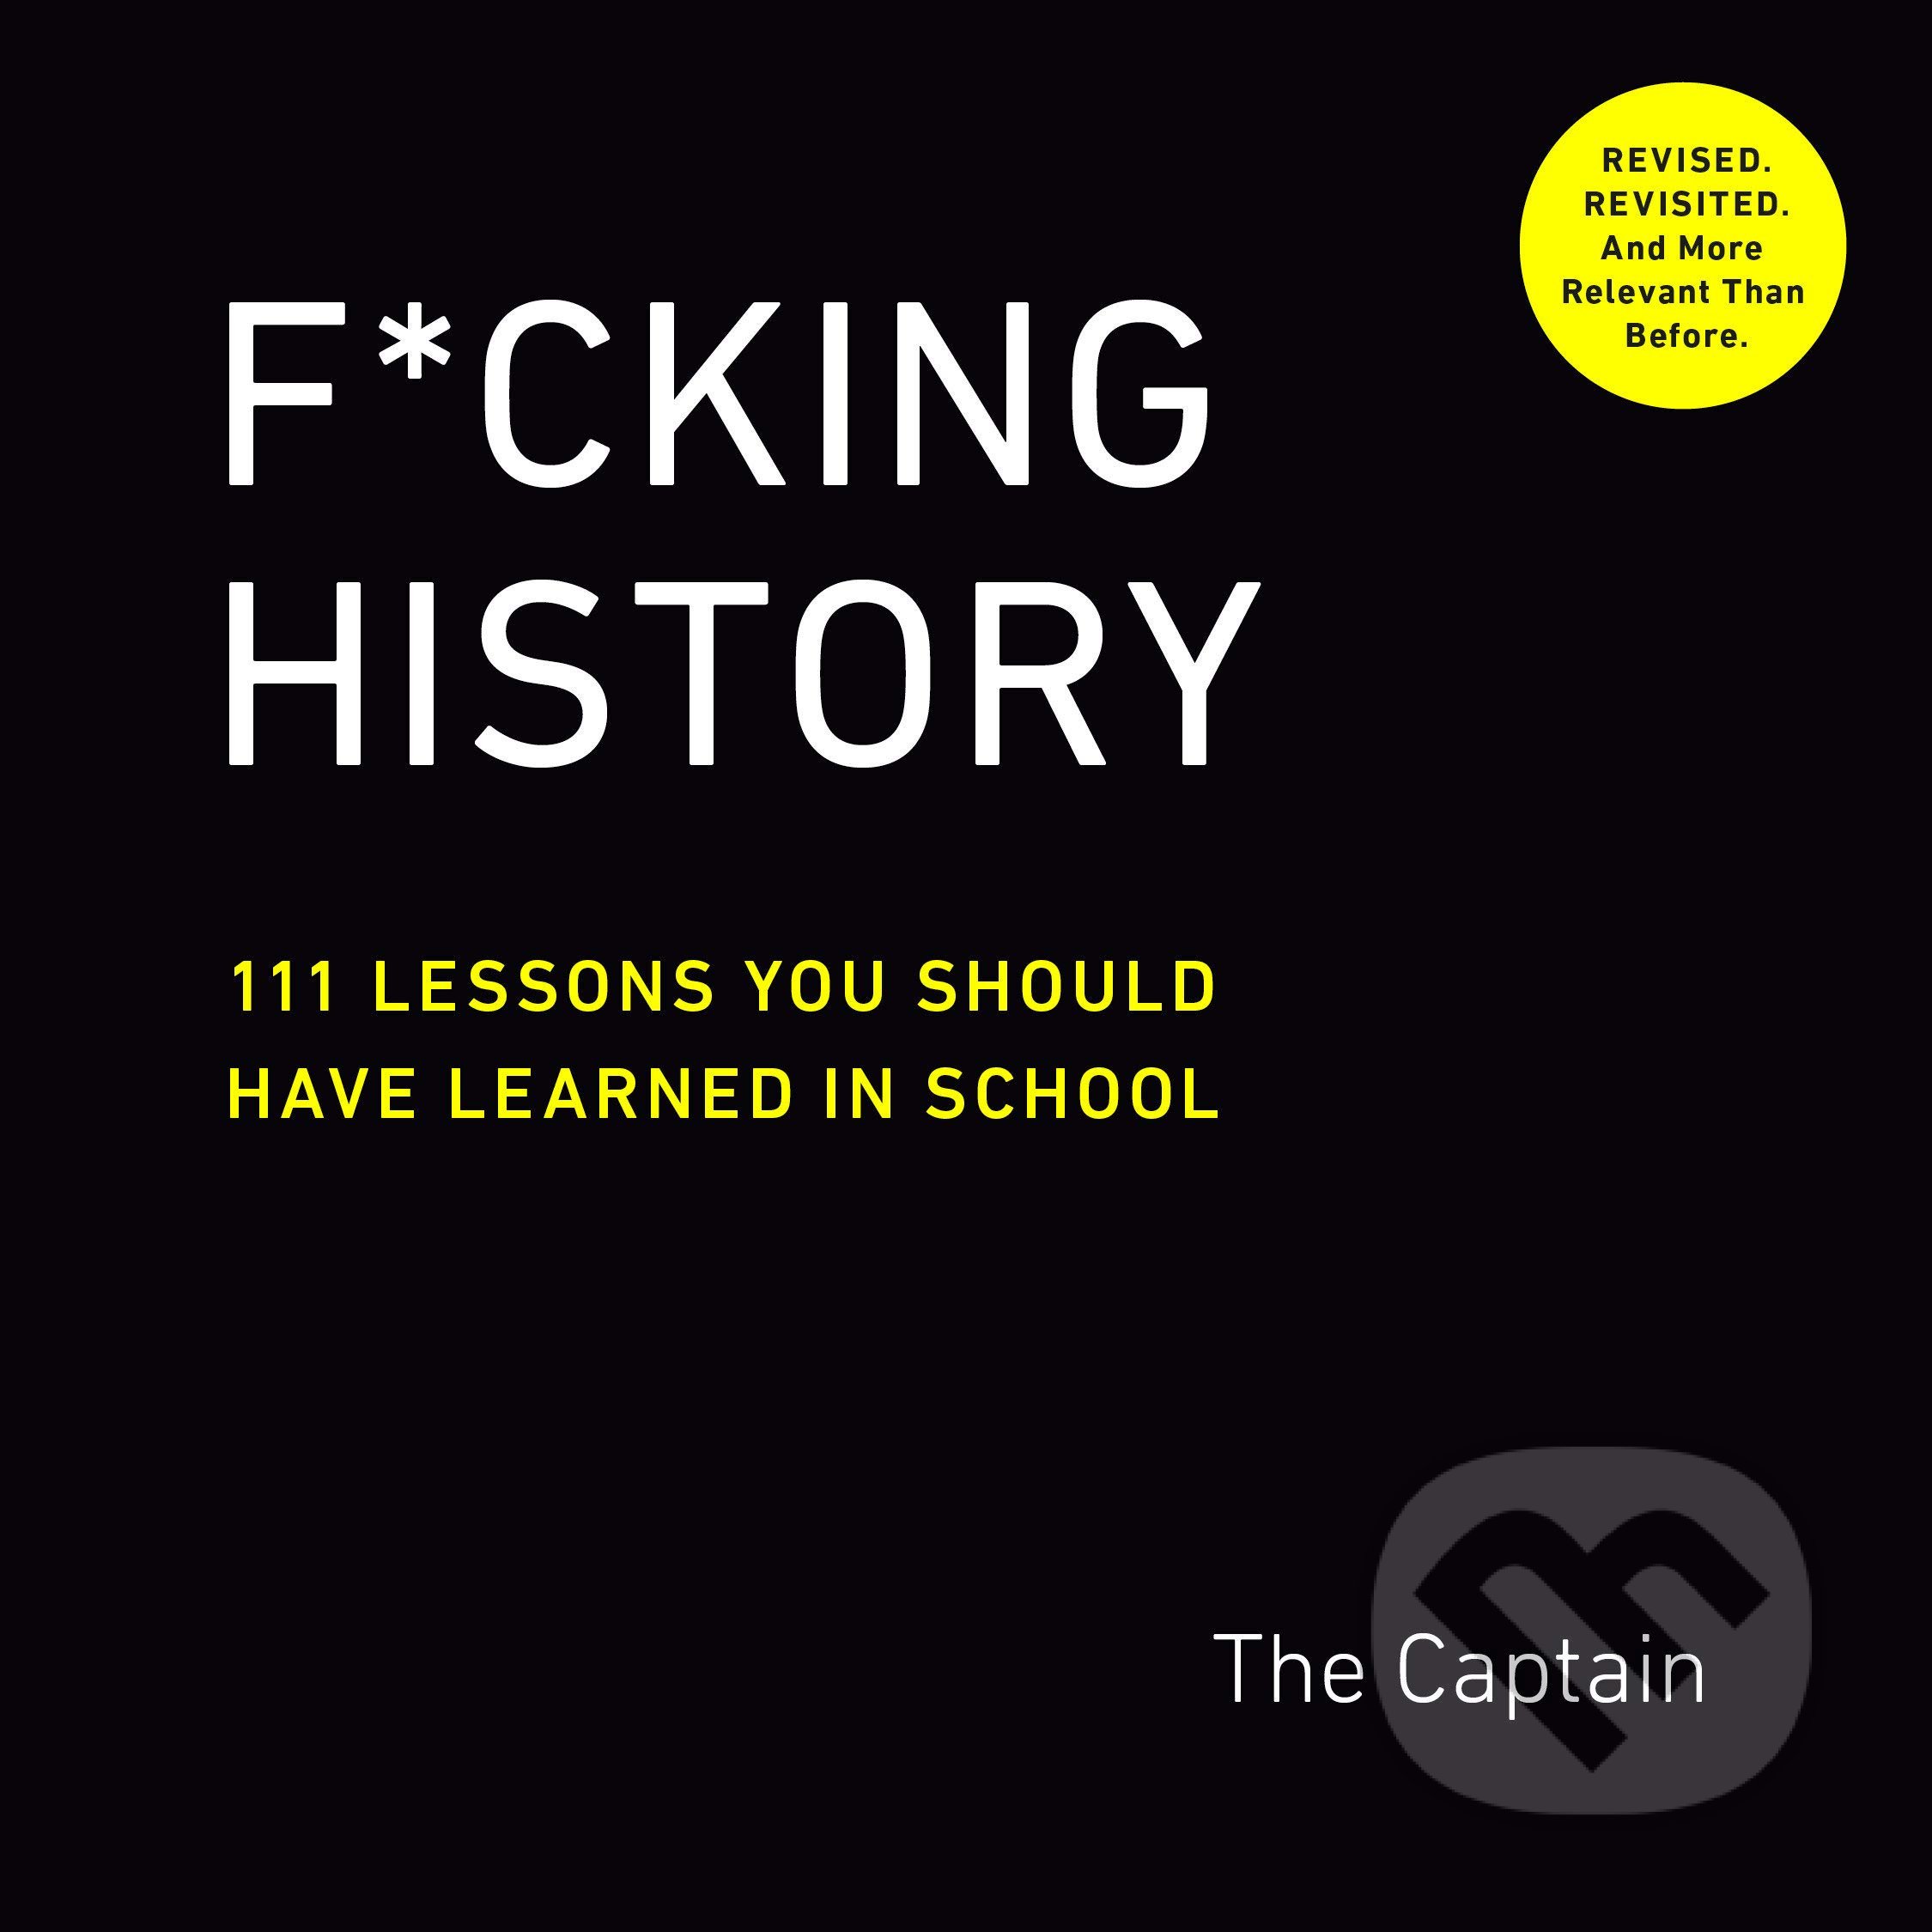 F*Cking History - The Captain, Perigee, 2020